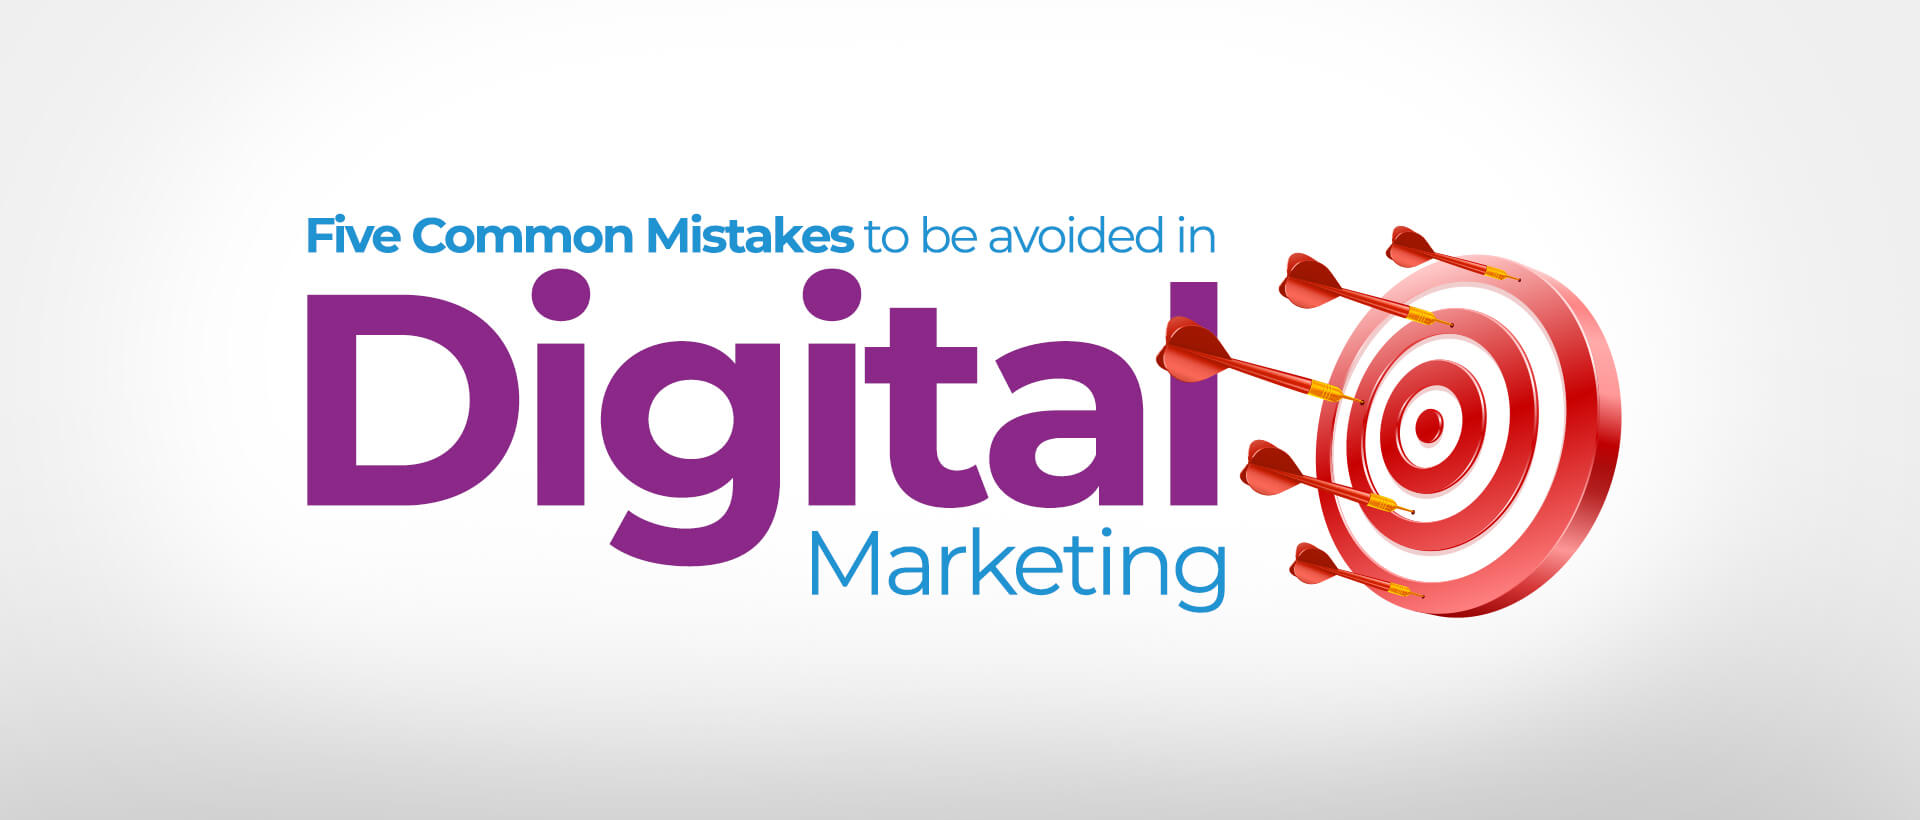 Five Common Mistakes to be avoided in Digital Marketing